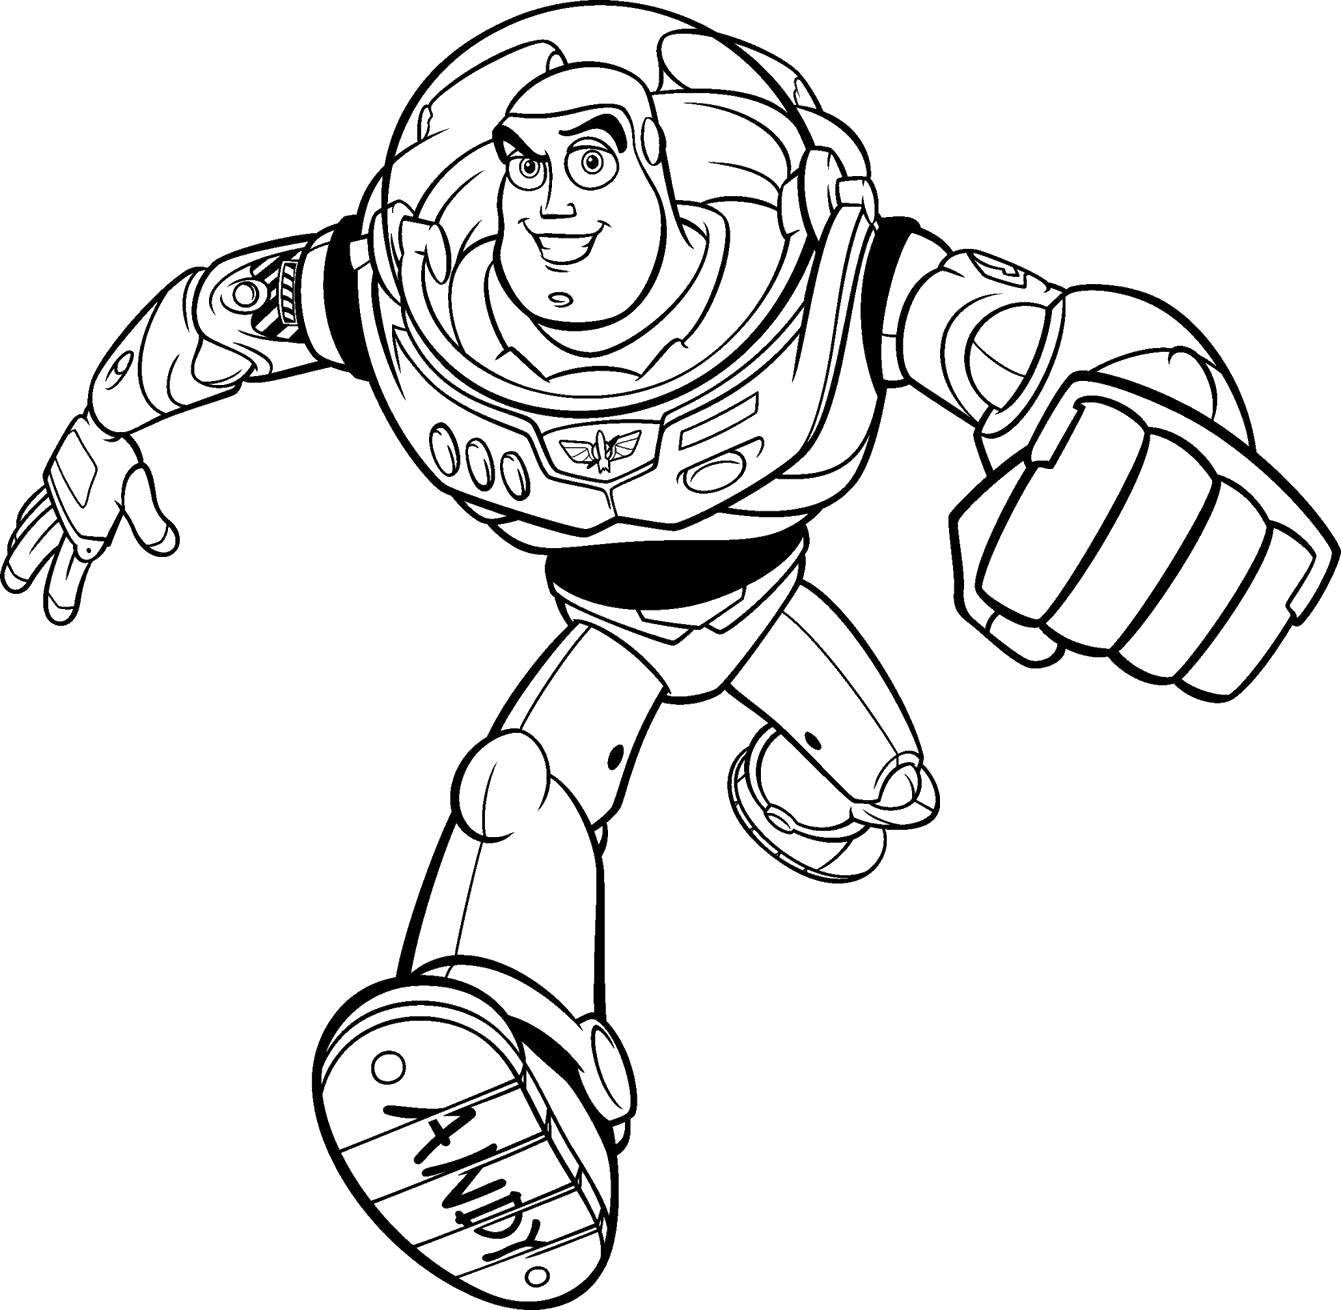 Coloring Buzz Lightyear. Category Disney coloring pages. Tags:  Cartoon character, toy Story.